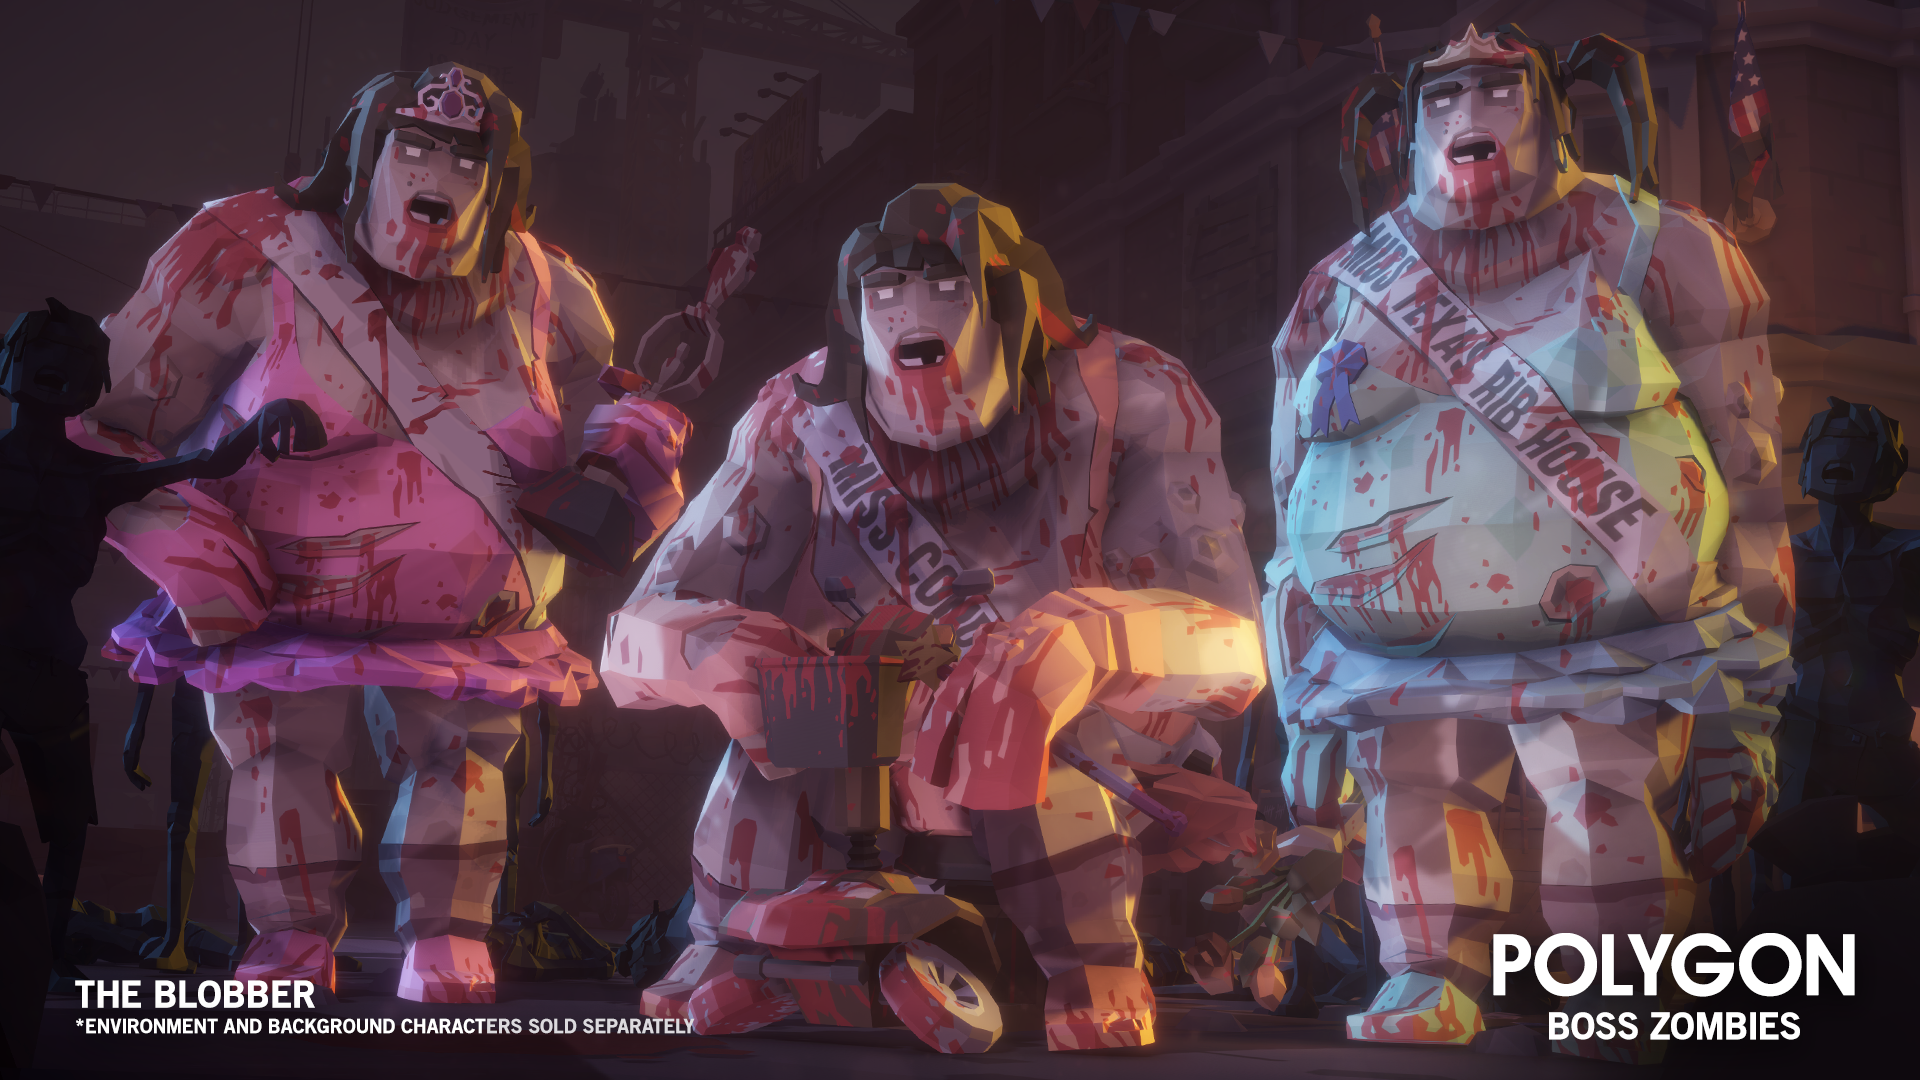 The Blobber characters from the Polygon Boss Zombies 3D asset pack for Unreal Engine and Unity